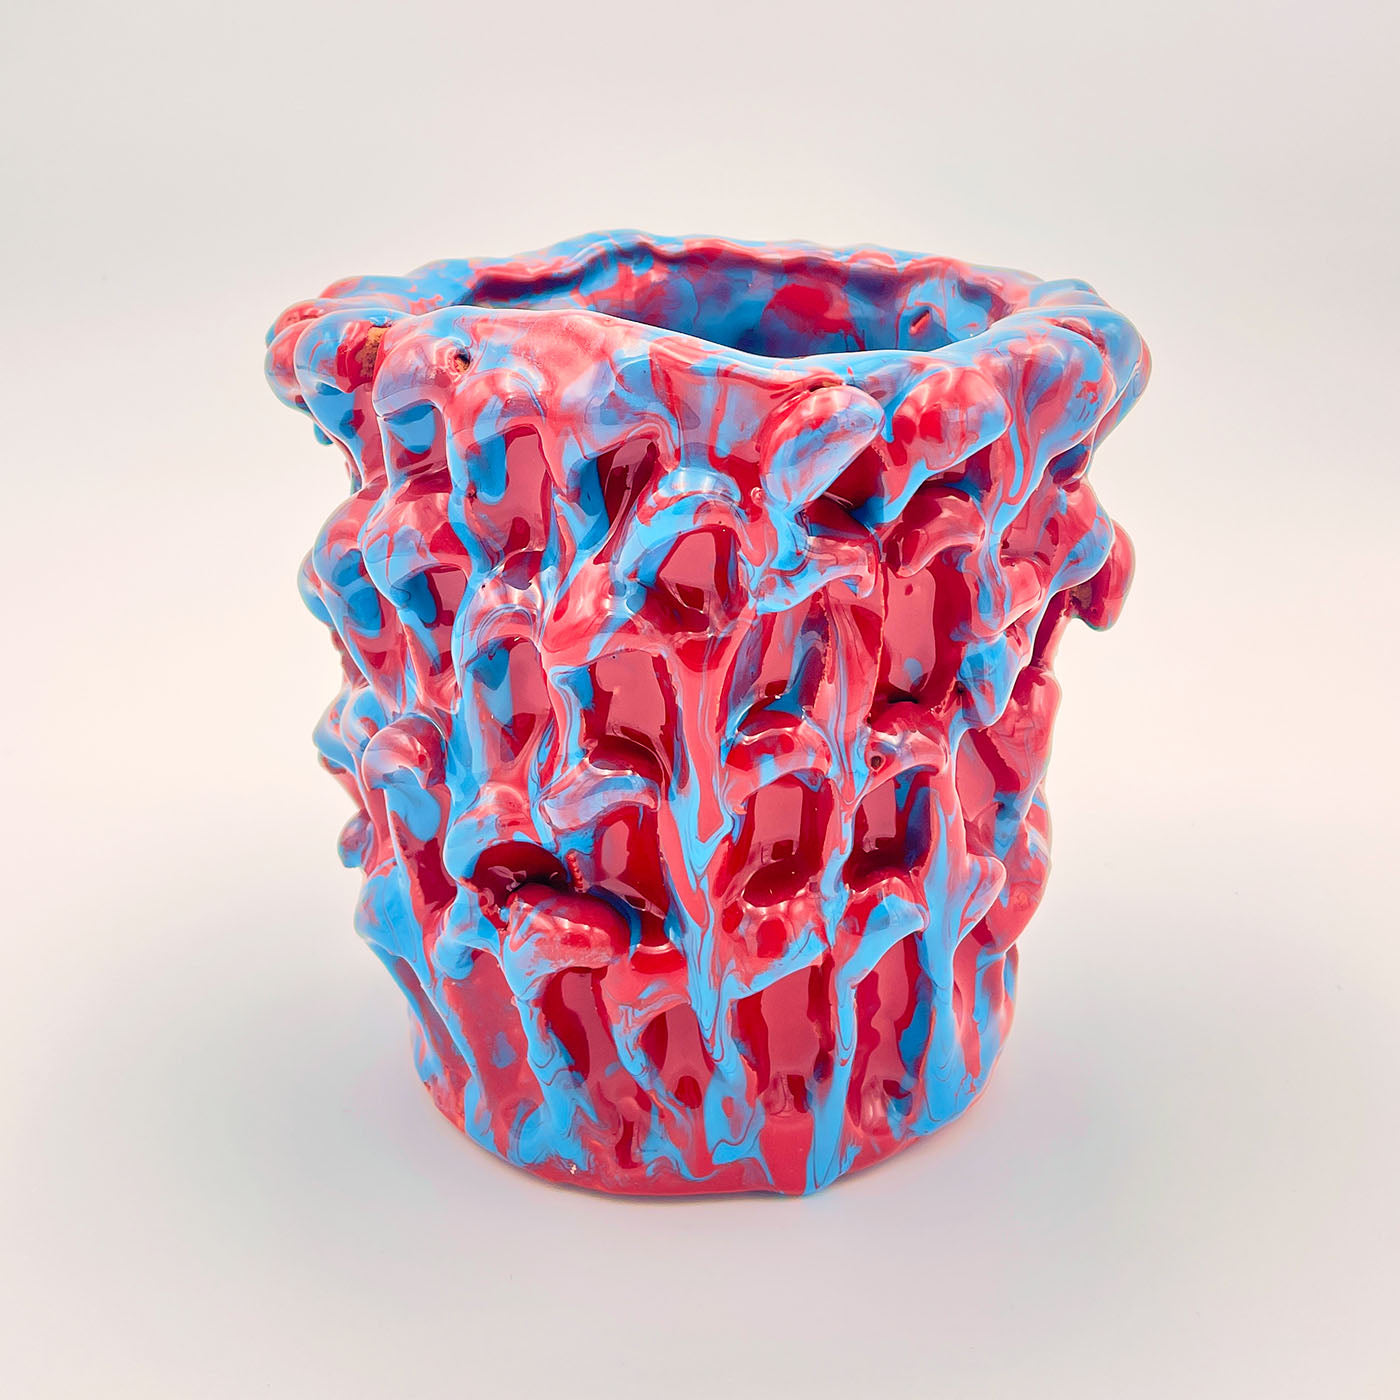 Onda Turquoise and Danger Red Vase - Alternative view 4